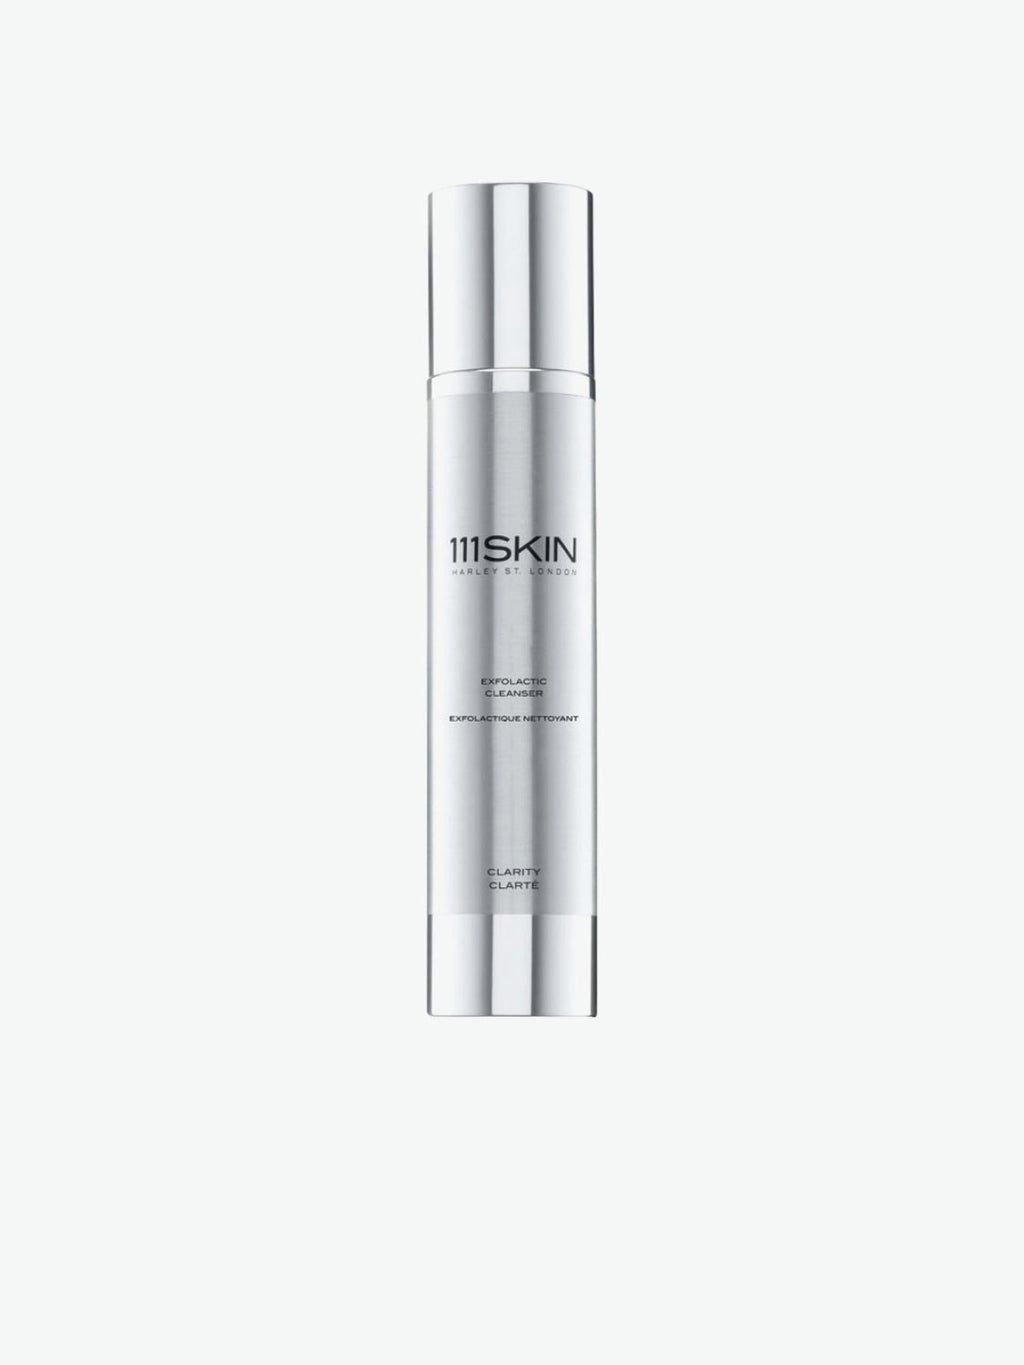 111Skin Exfolactic Cleanser | A